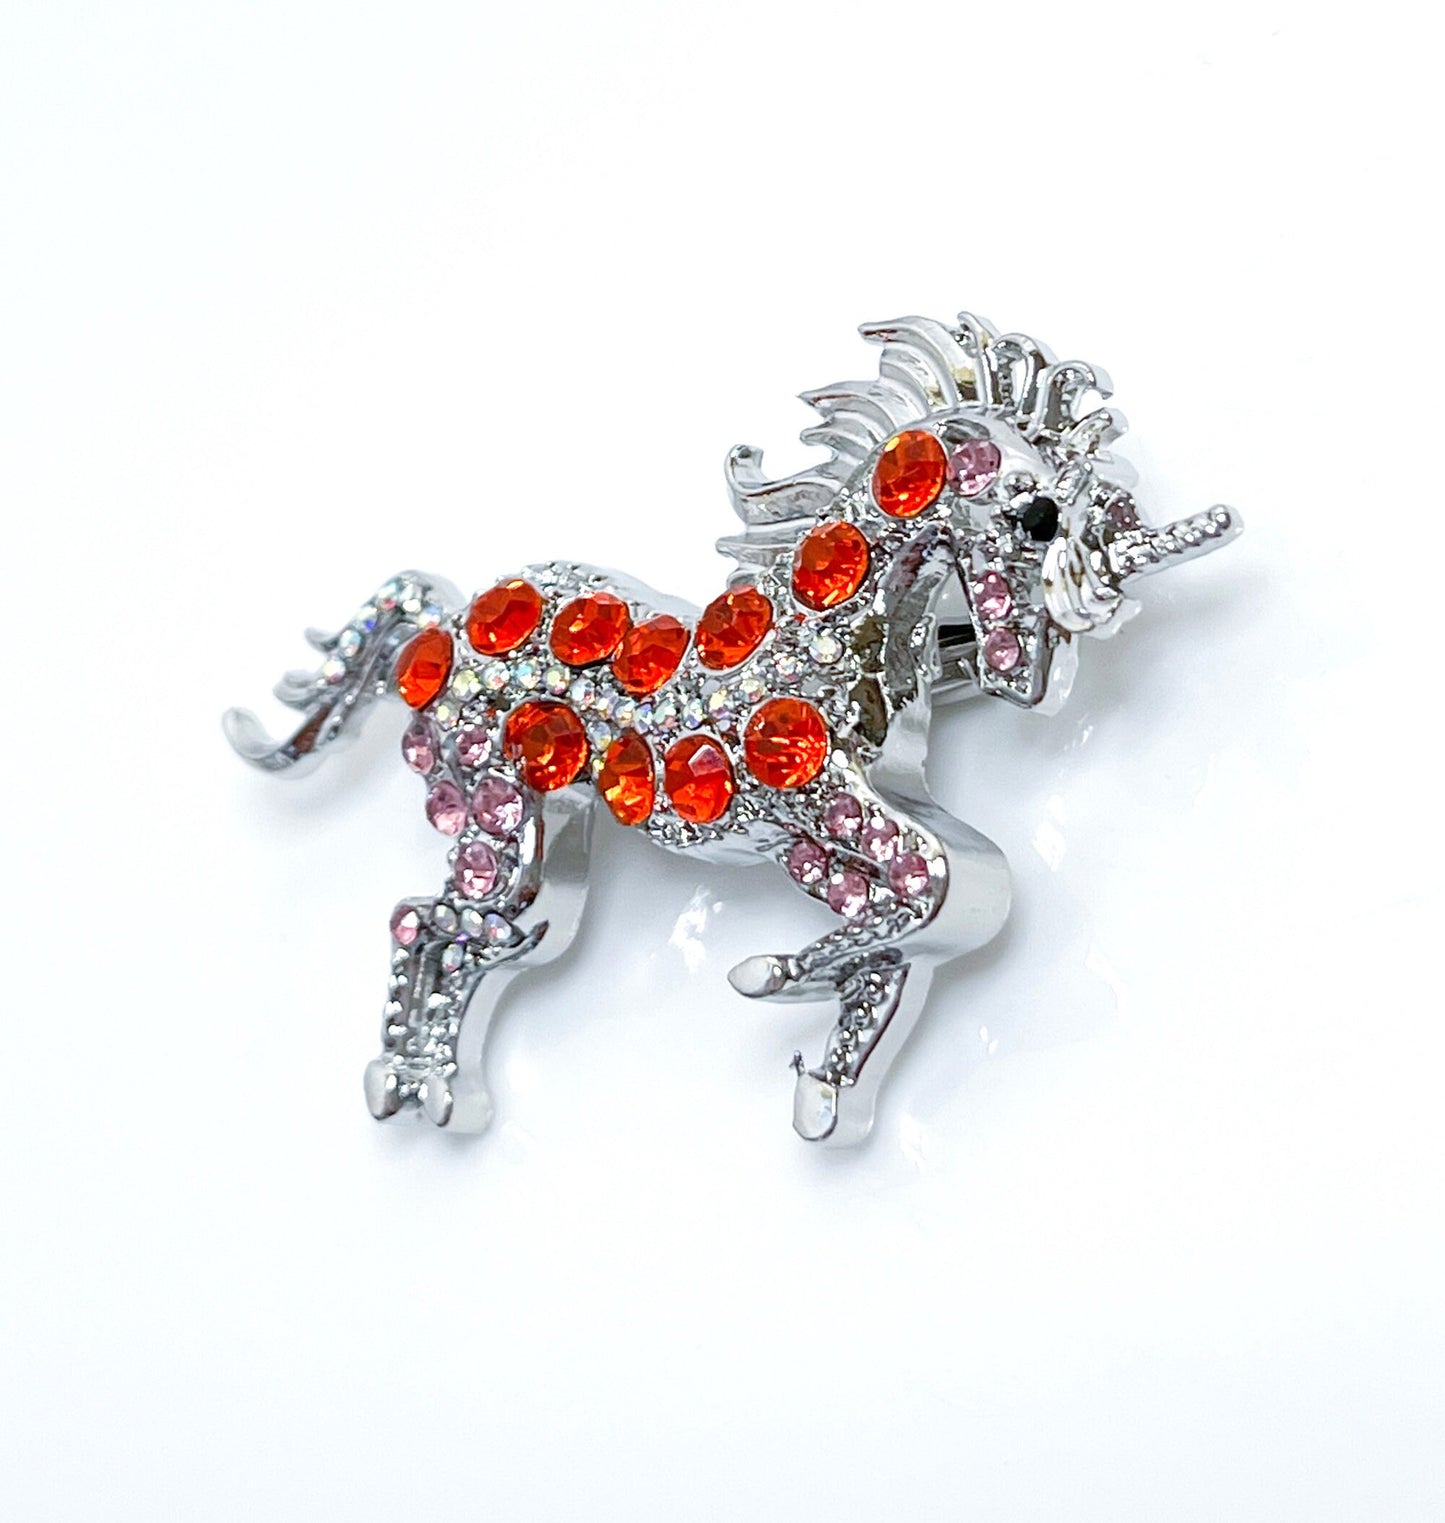 Red Crystal Unicorn Brooch | Gift for Unicorn Lovers | Crystal Fantasy Pin 